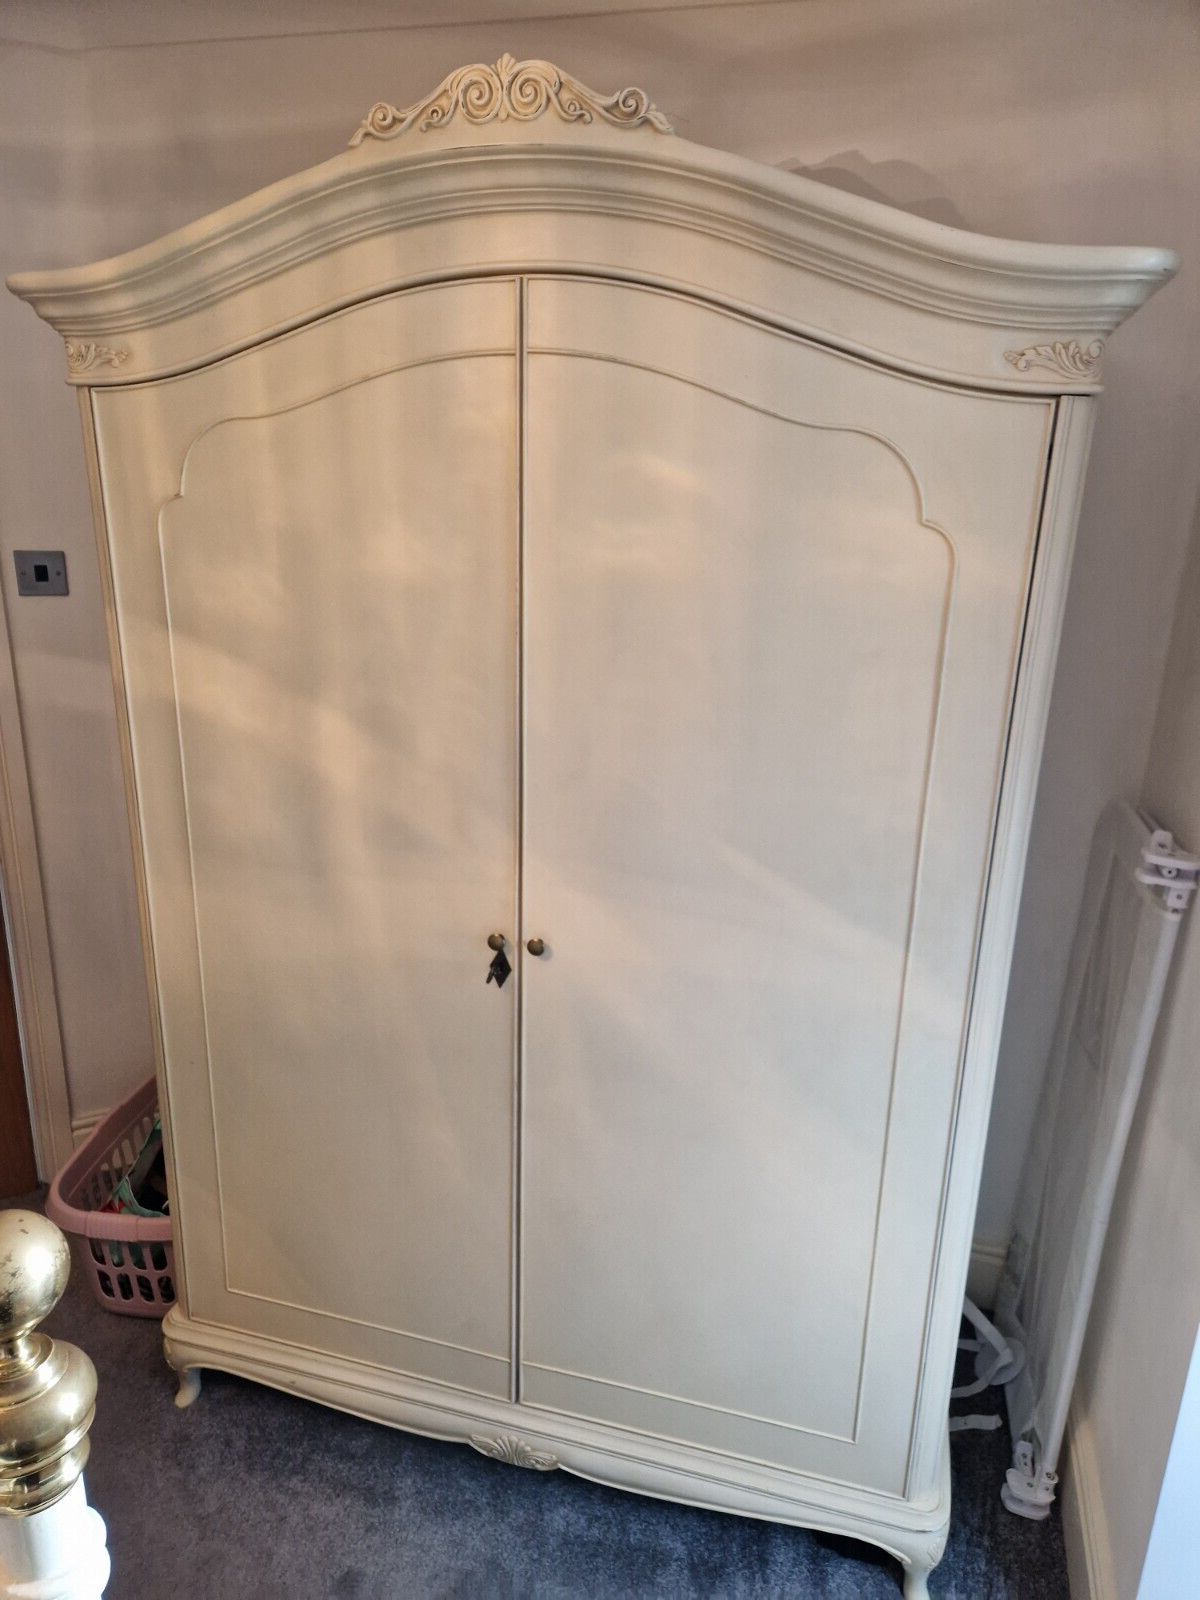 Willis And Gambier Ivory 2 Door Wide Fitted Double Wardrobe | Ebay Intended For Willis And Gambier Wardrobes (View 10 of 20)